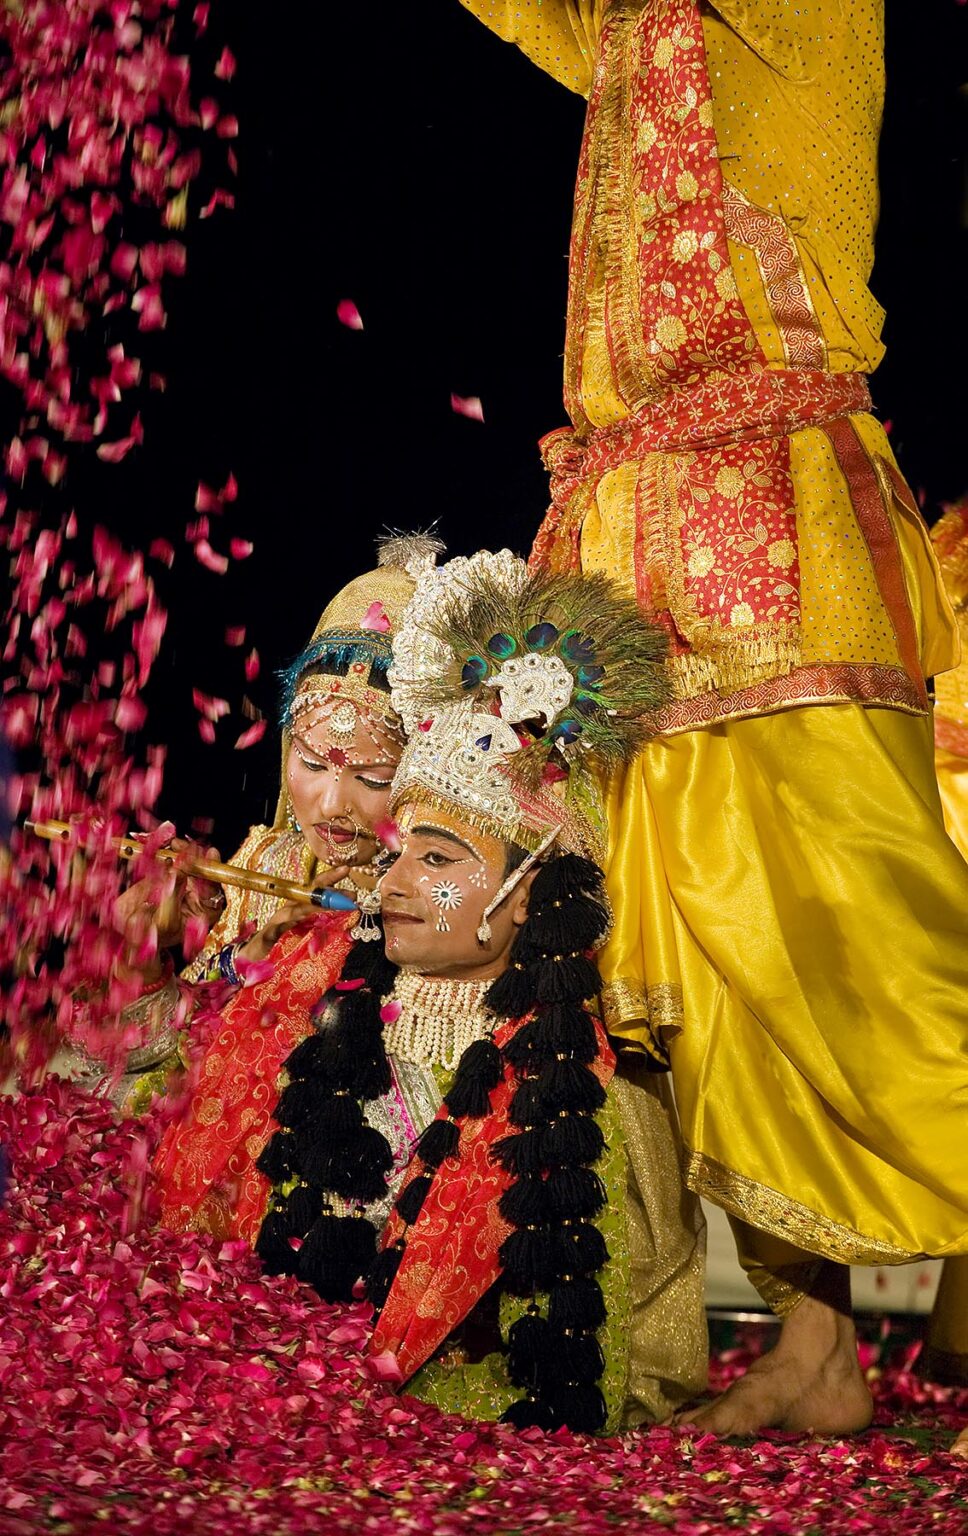 KRISHNA and RHADA are covered in rose petals during a play at the GANGUR FESTIVAL or MEWAR FESTIVAL - UDAIPUR, RAJASTHAN, INDIA